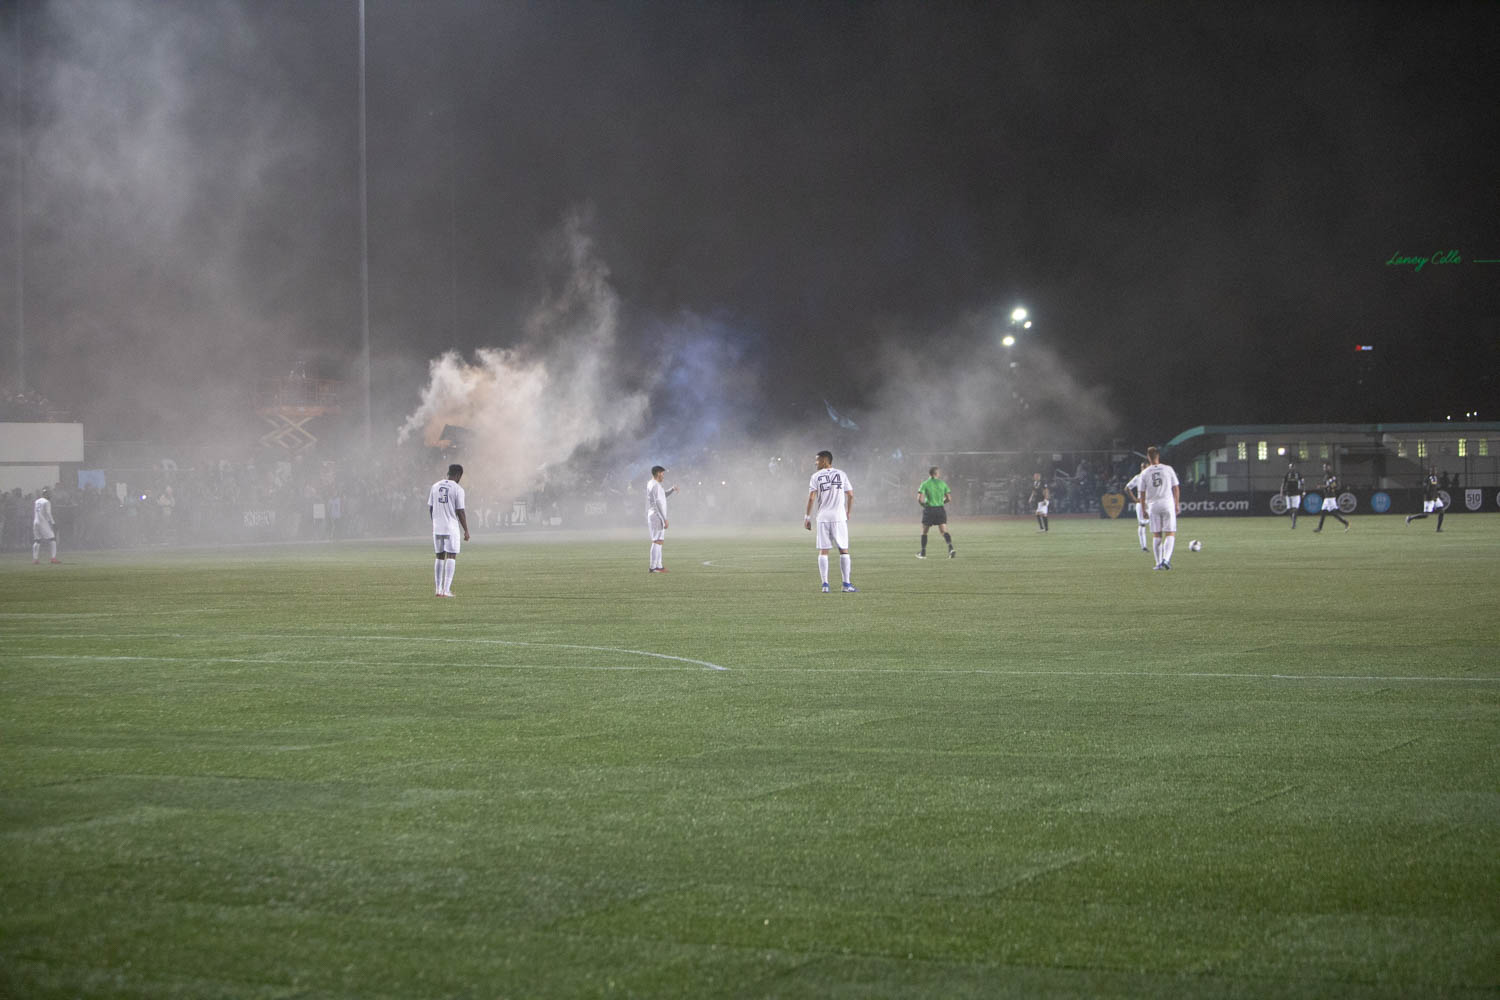 Smoke hovers over the soccer field